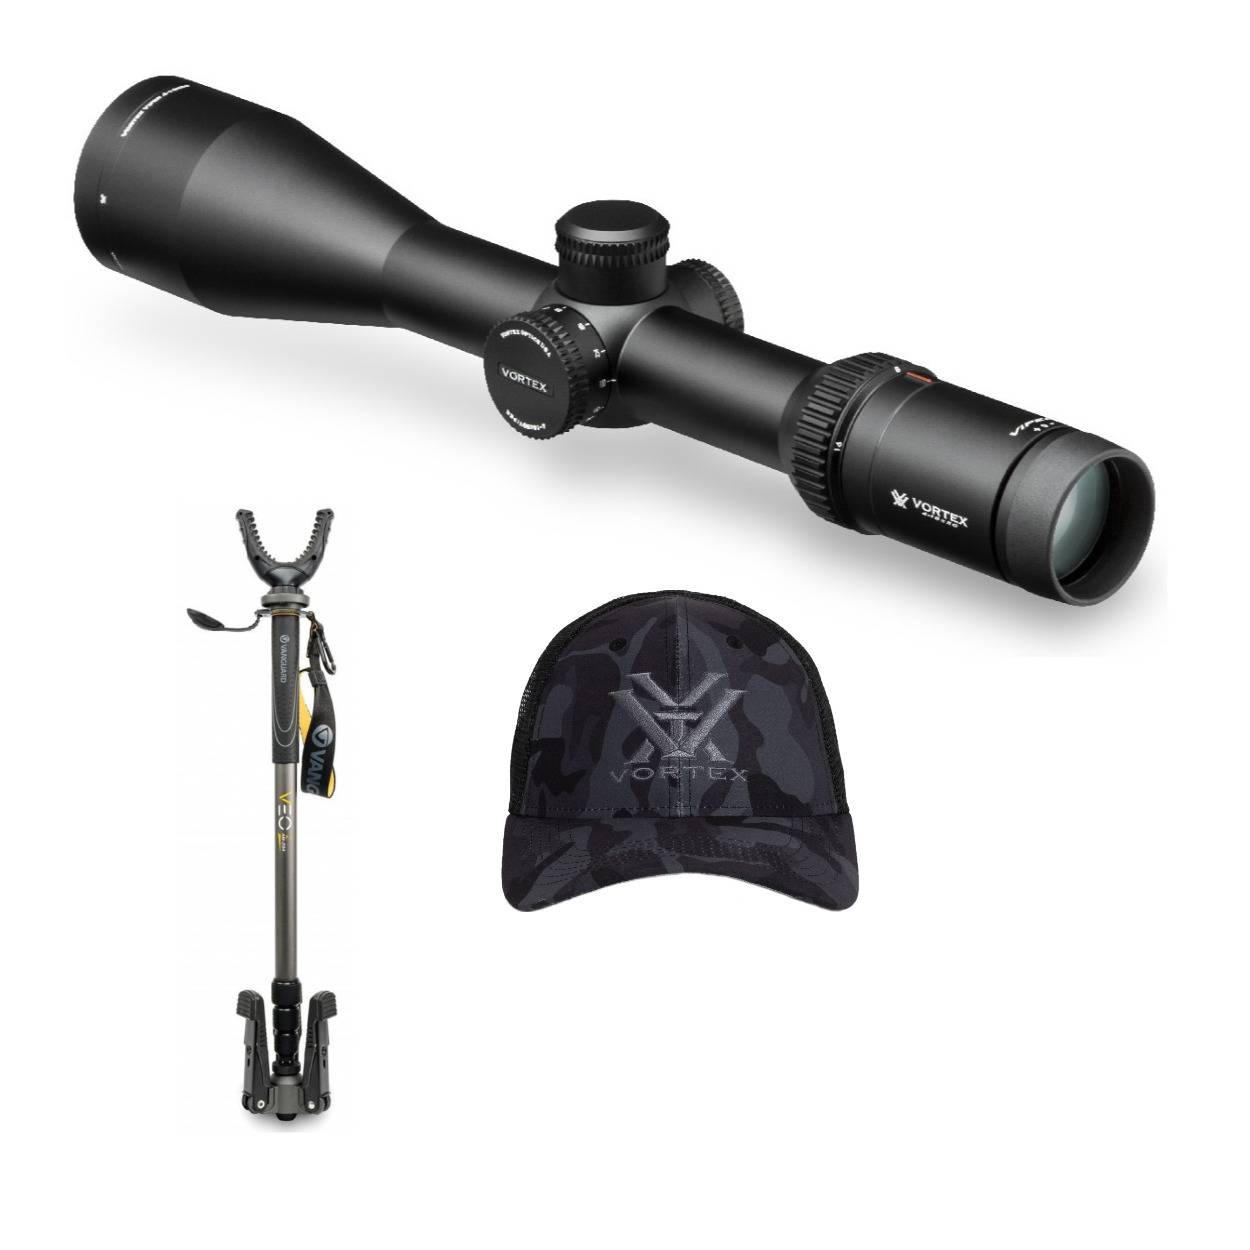 Vortex Viper HS 4-16x50mm Riflescope with Dead-Hold BDC Reticle and Tripod